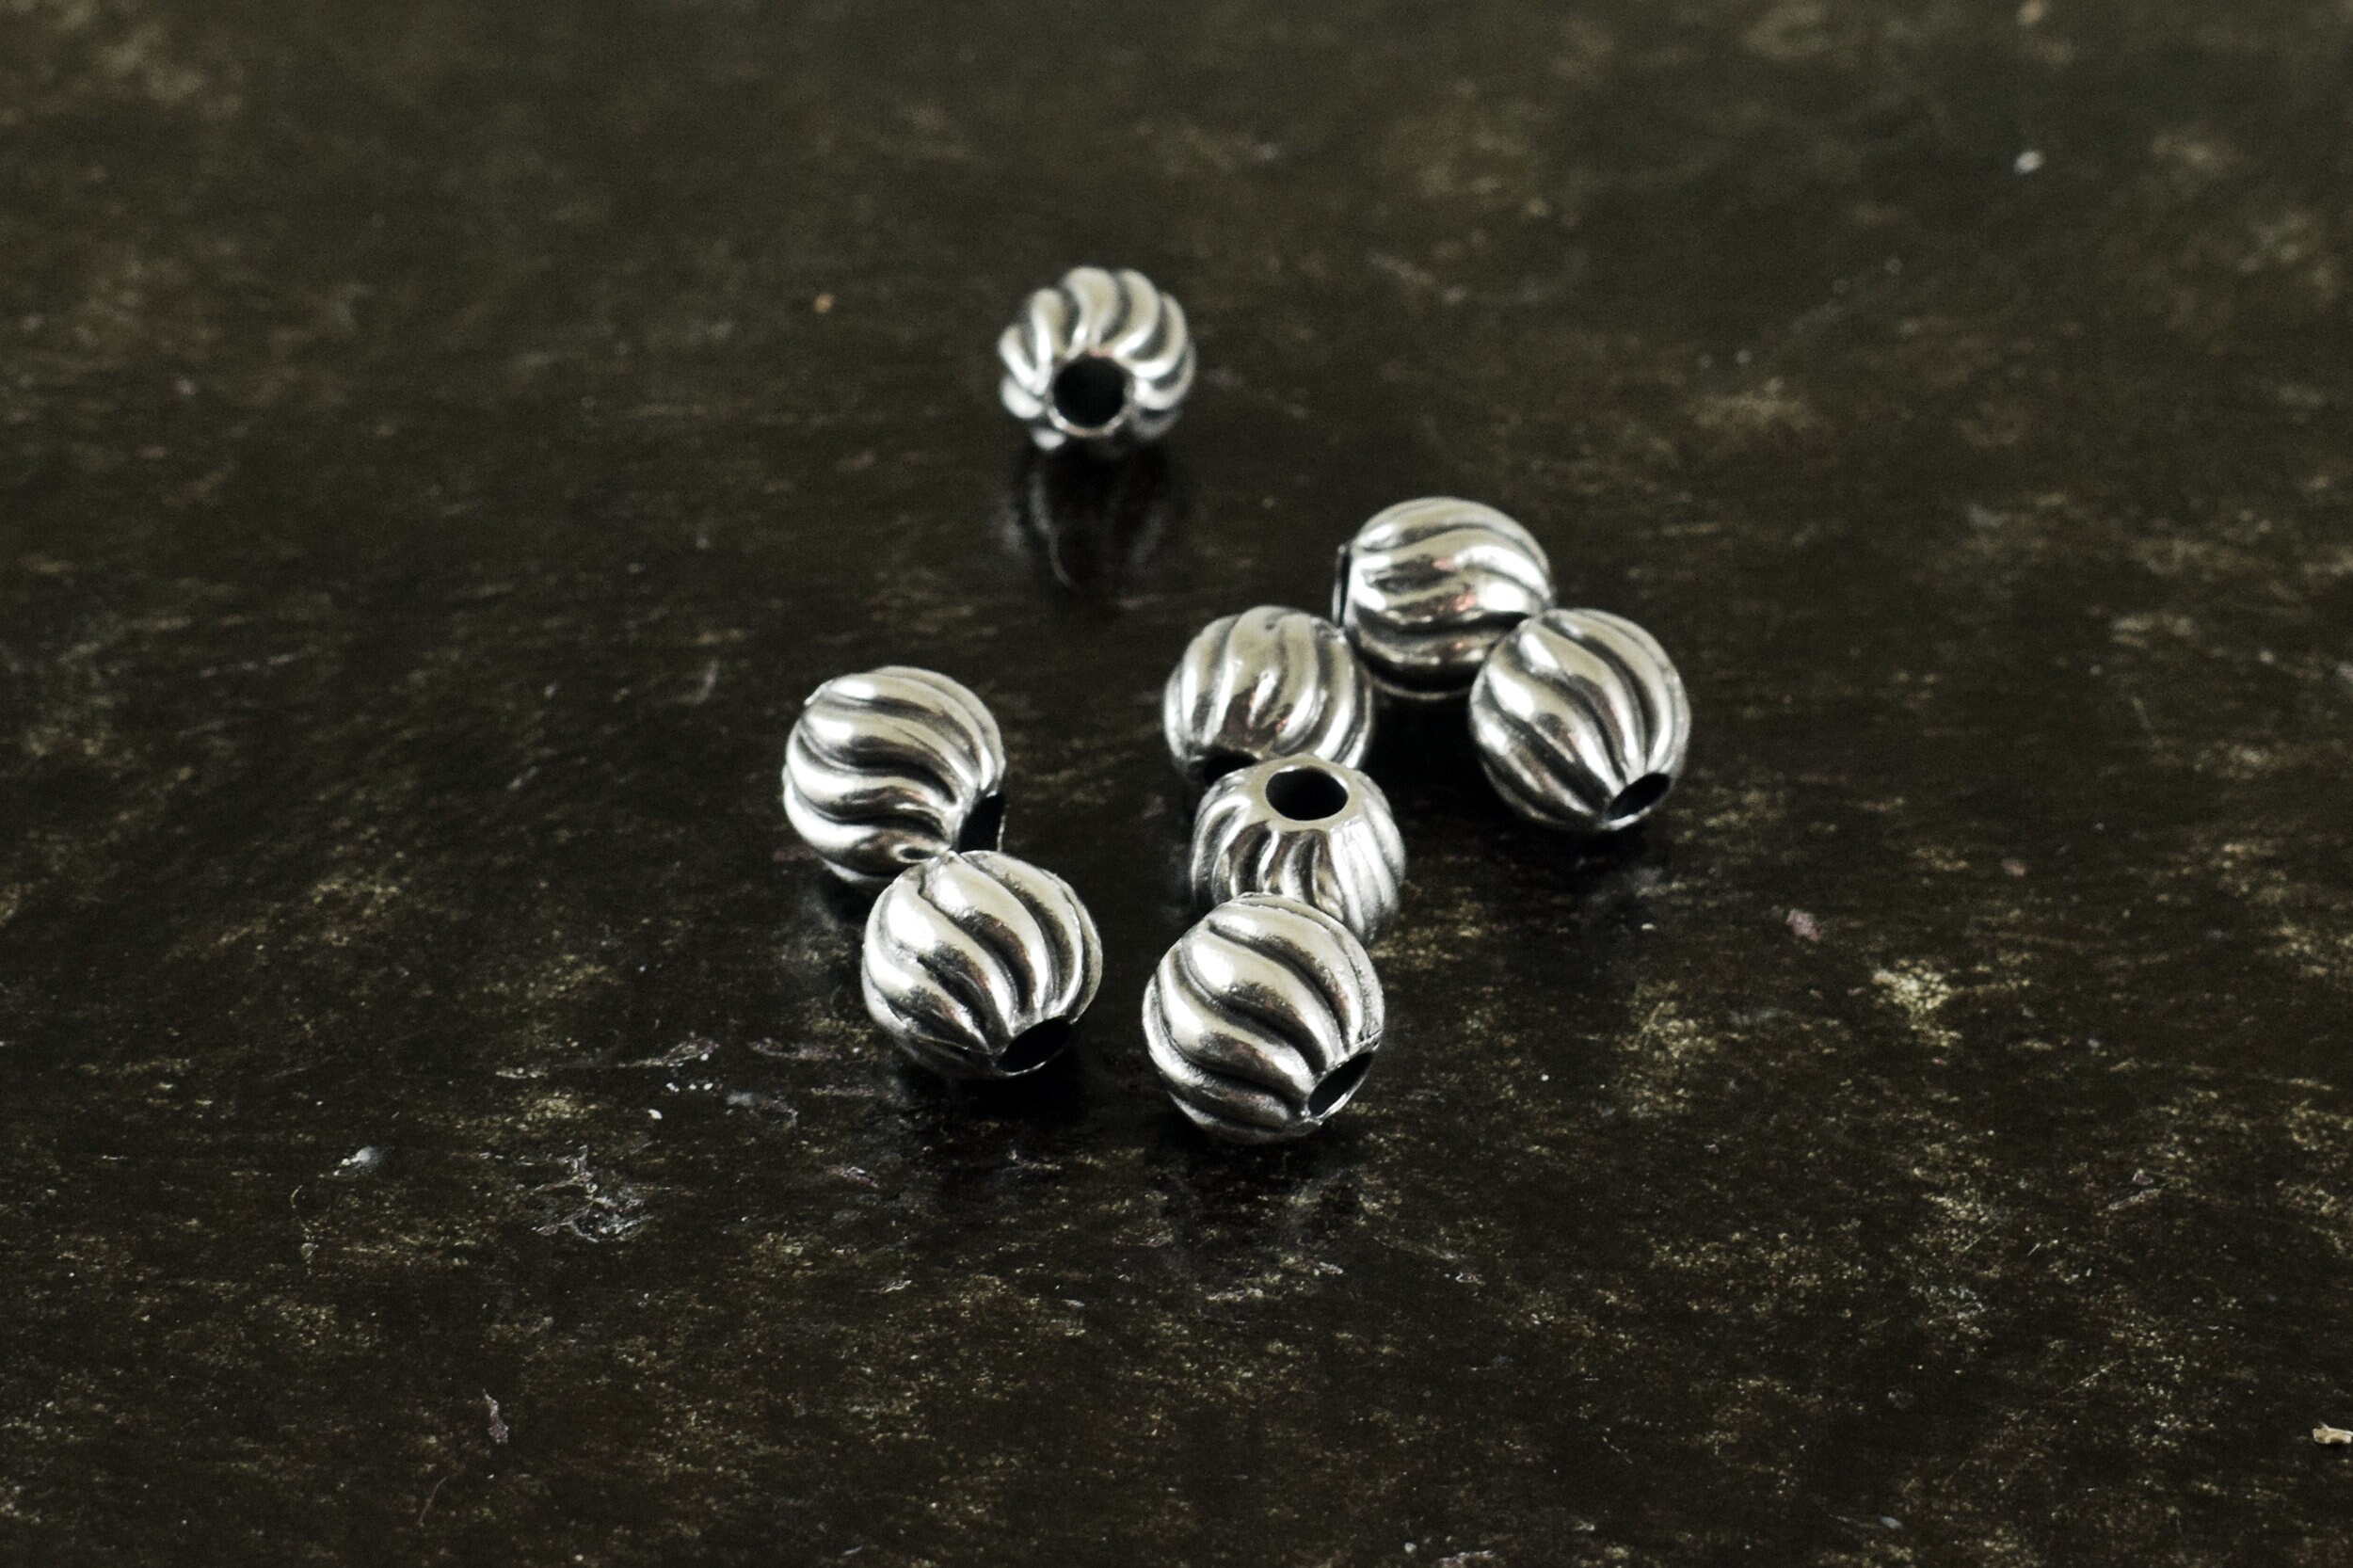 10mm 10pcs Silver Spacer Beads, Antique Silver Plated Bali Silver Beads for Jewelry  Making, Metal Spacers for 3mm Hole 